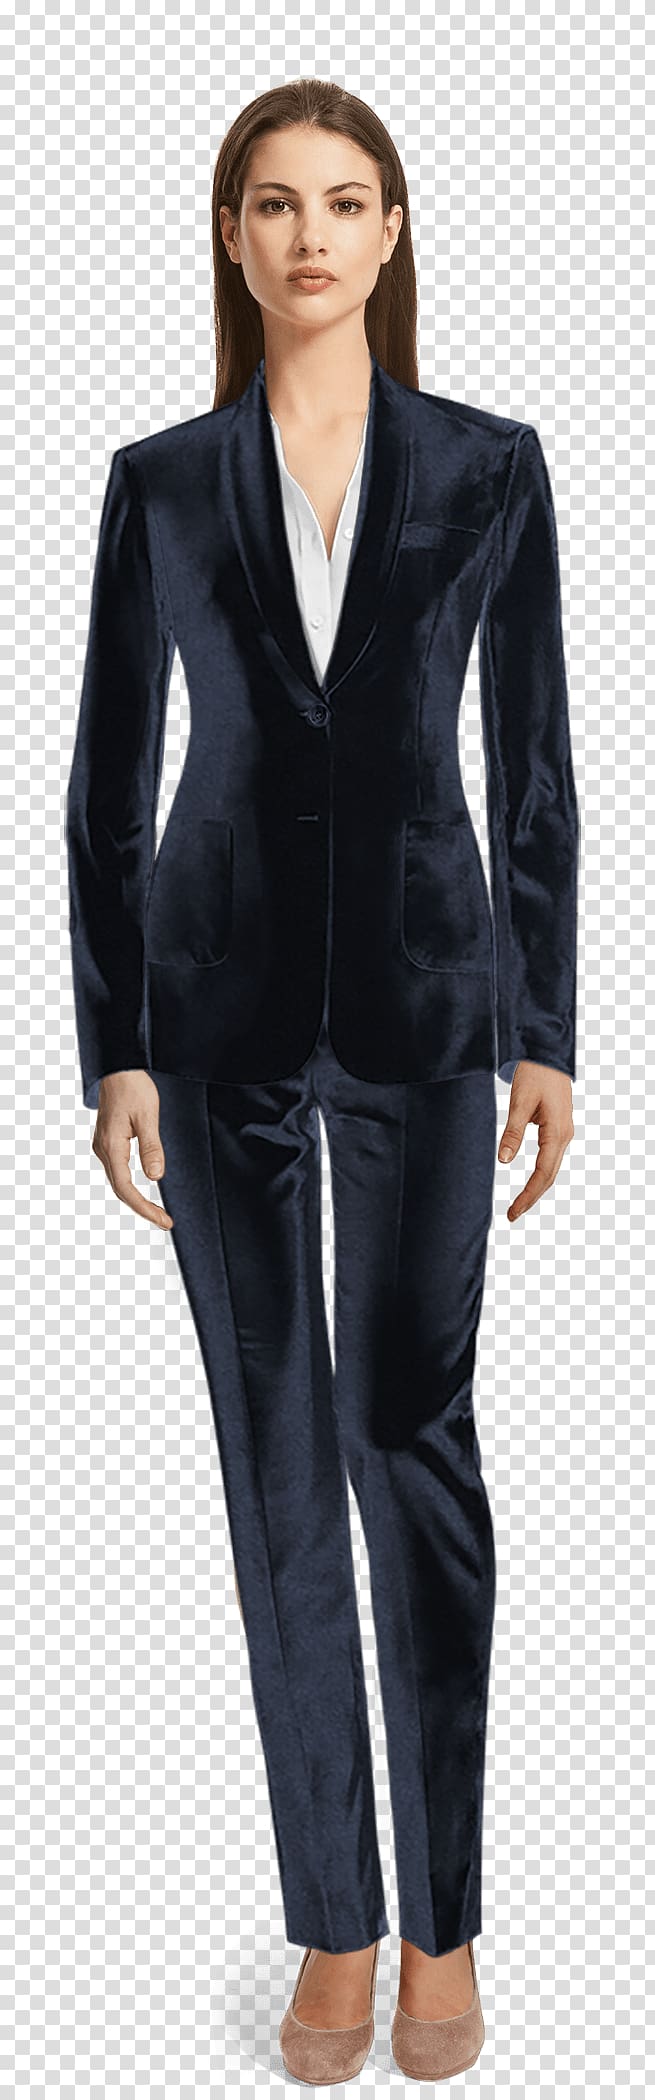 Pant Suits Double-breasted Tailor Clothing, WOMEN SUIT transparent background PNG clipart